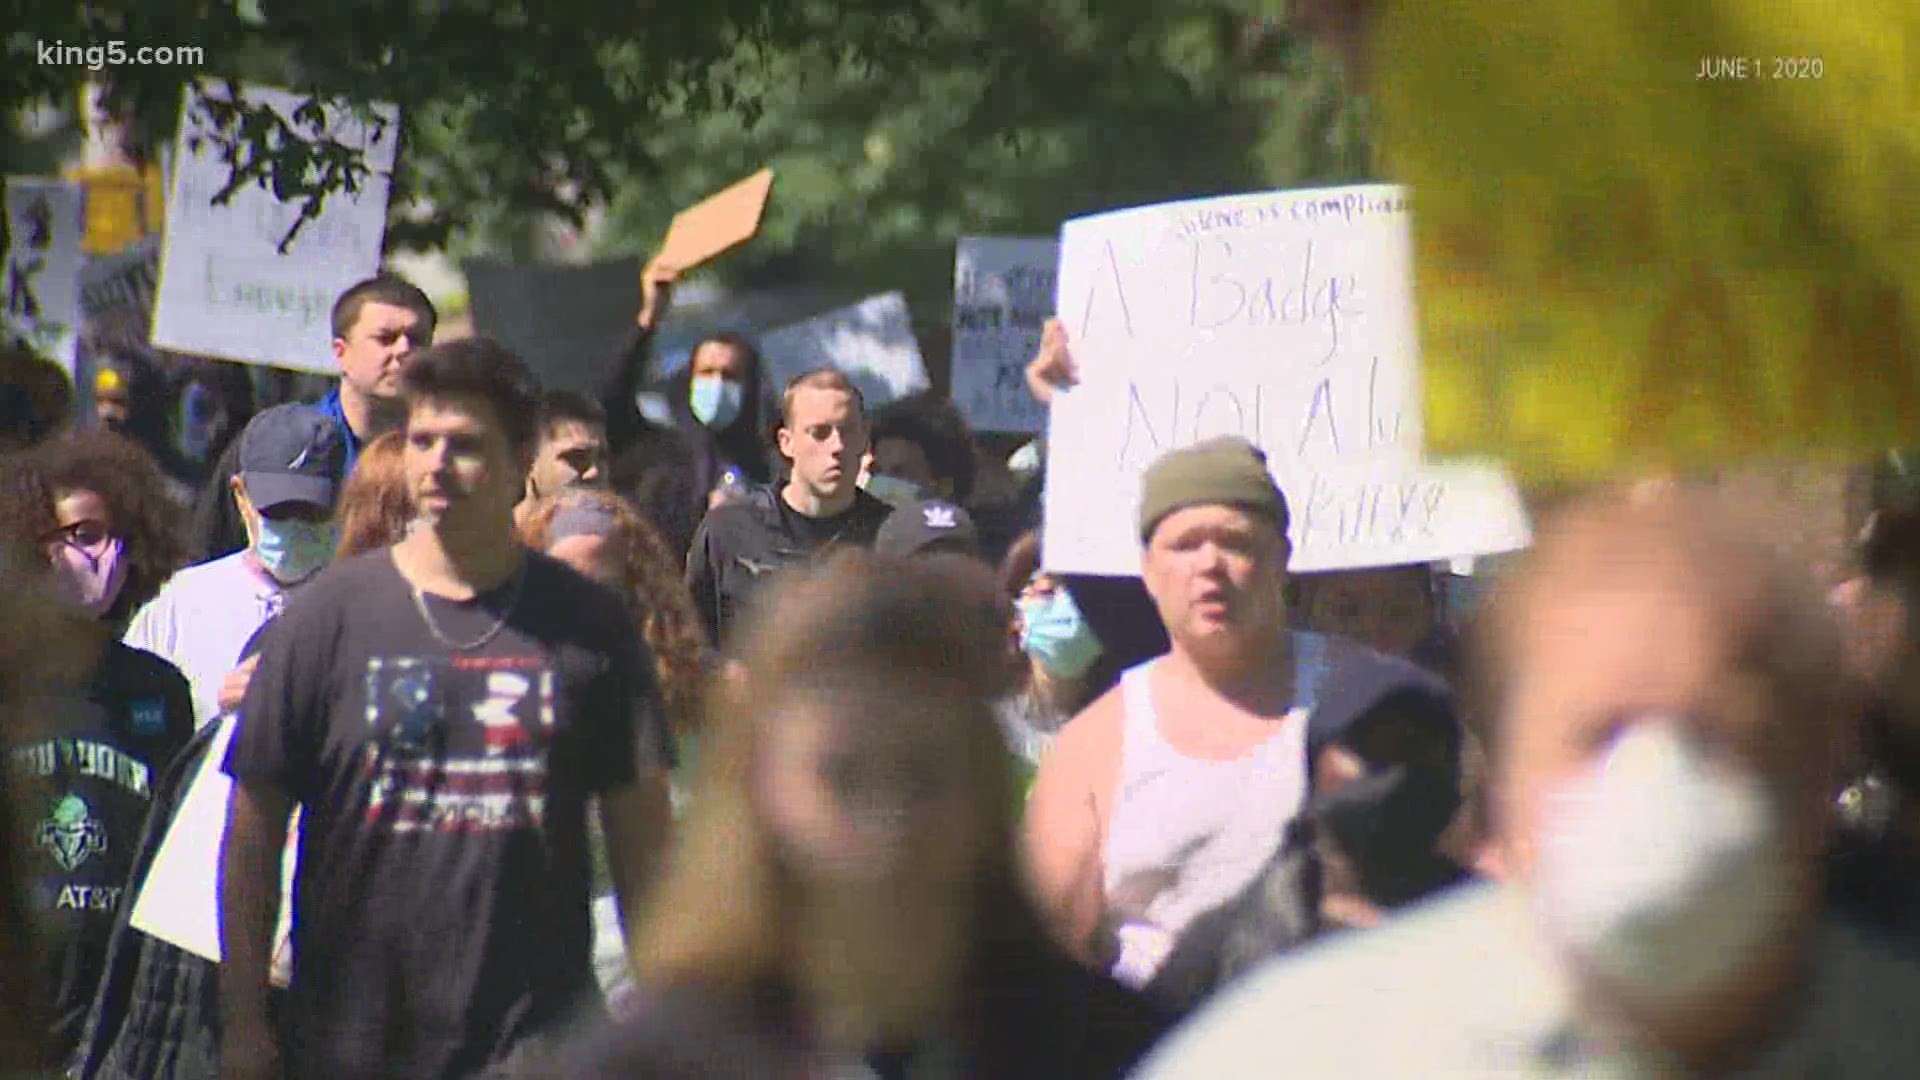 Hundreds of people were peacefully protesting in Tacoma when a small group of people vandalized small businesses.